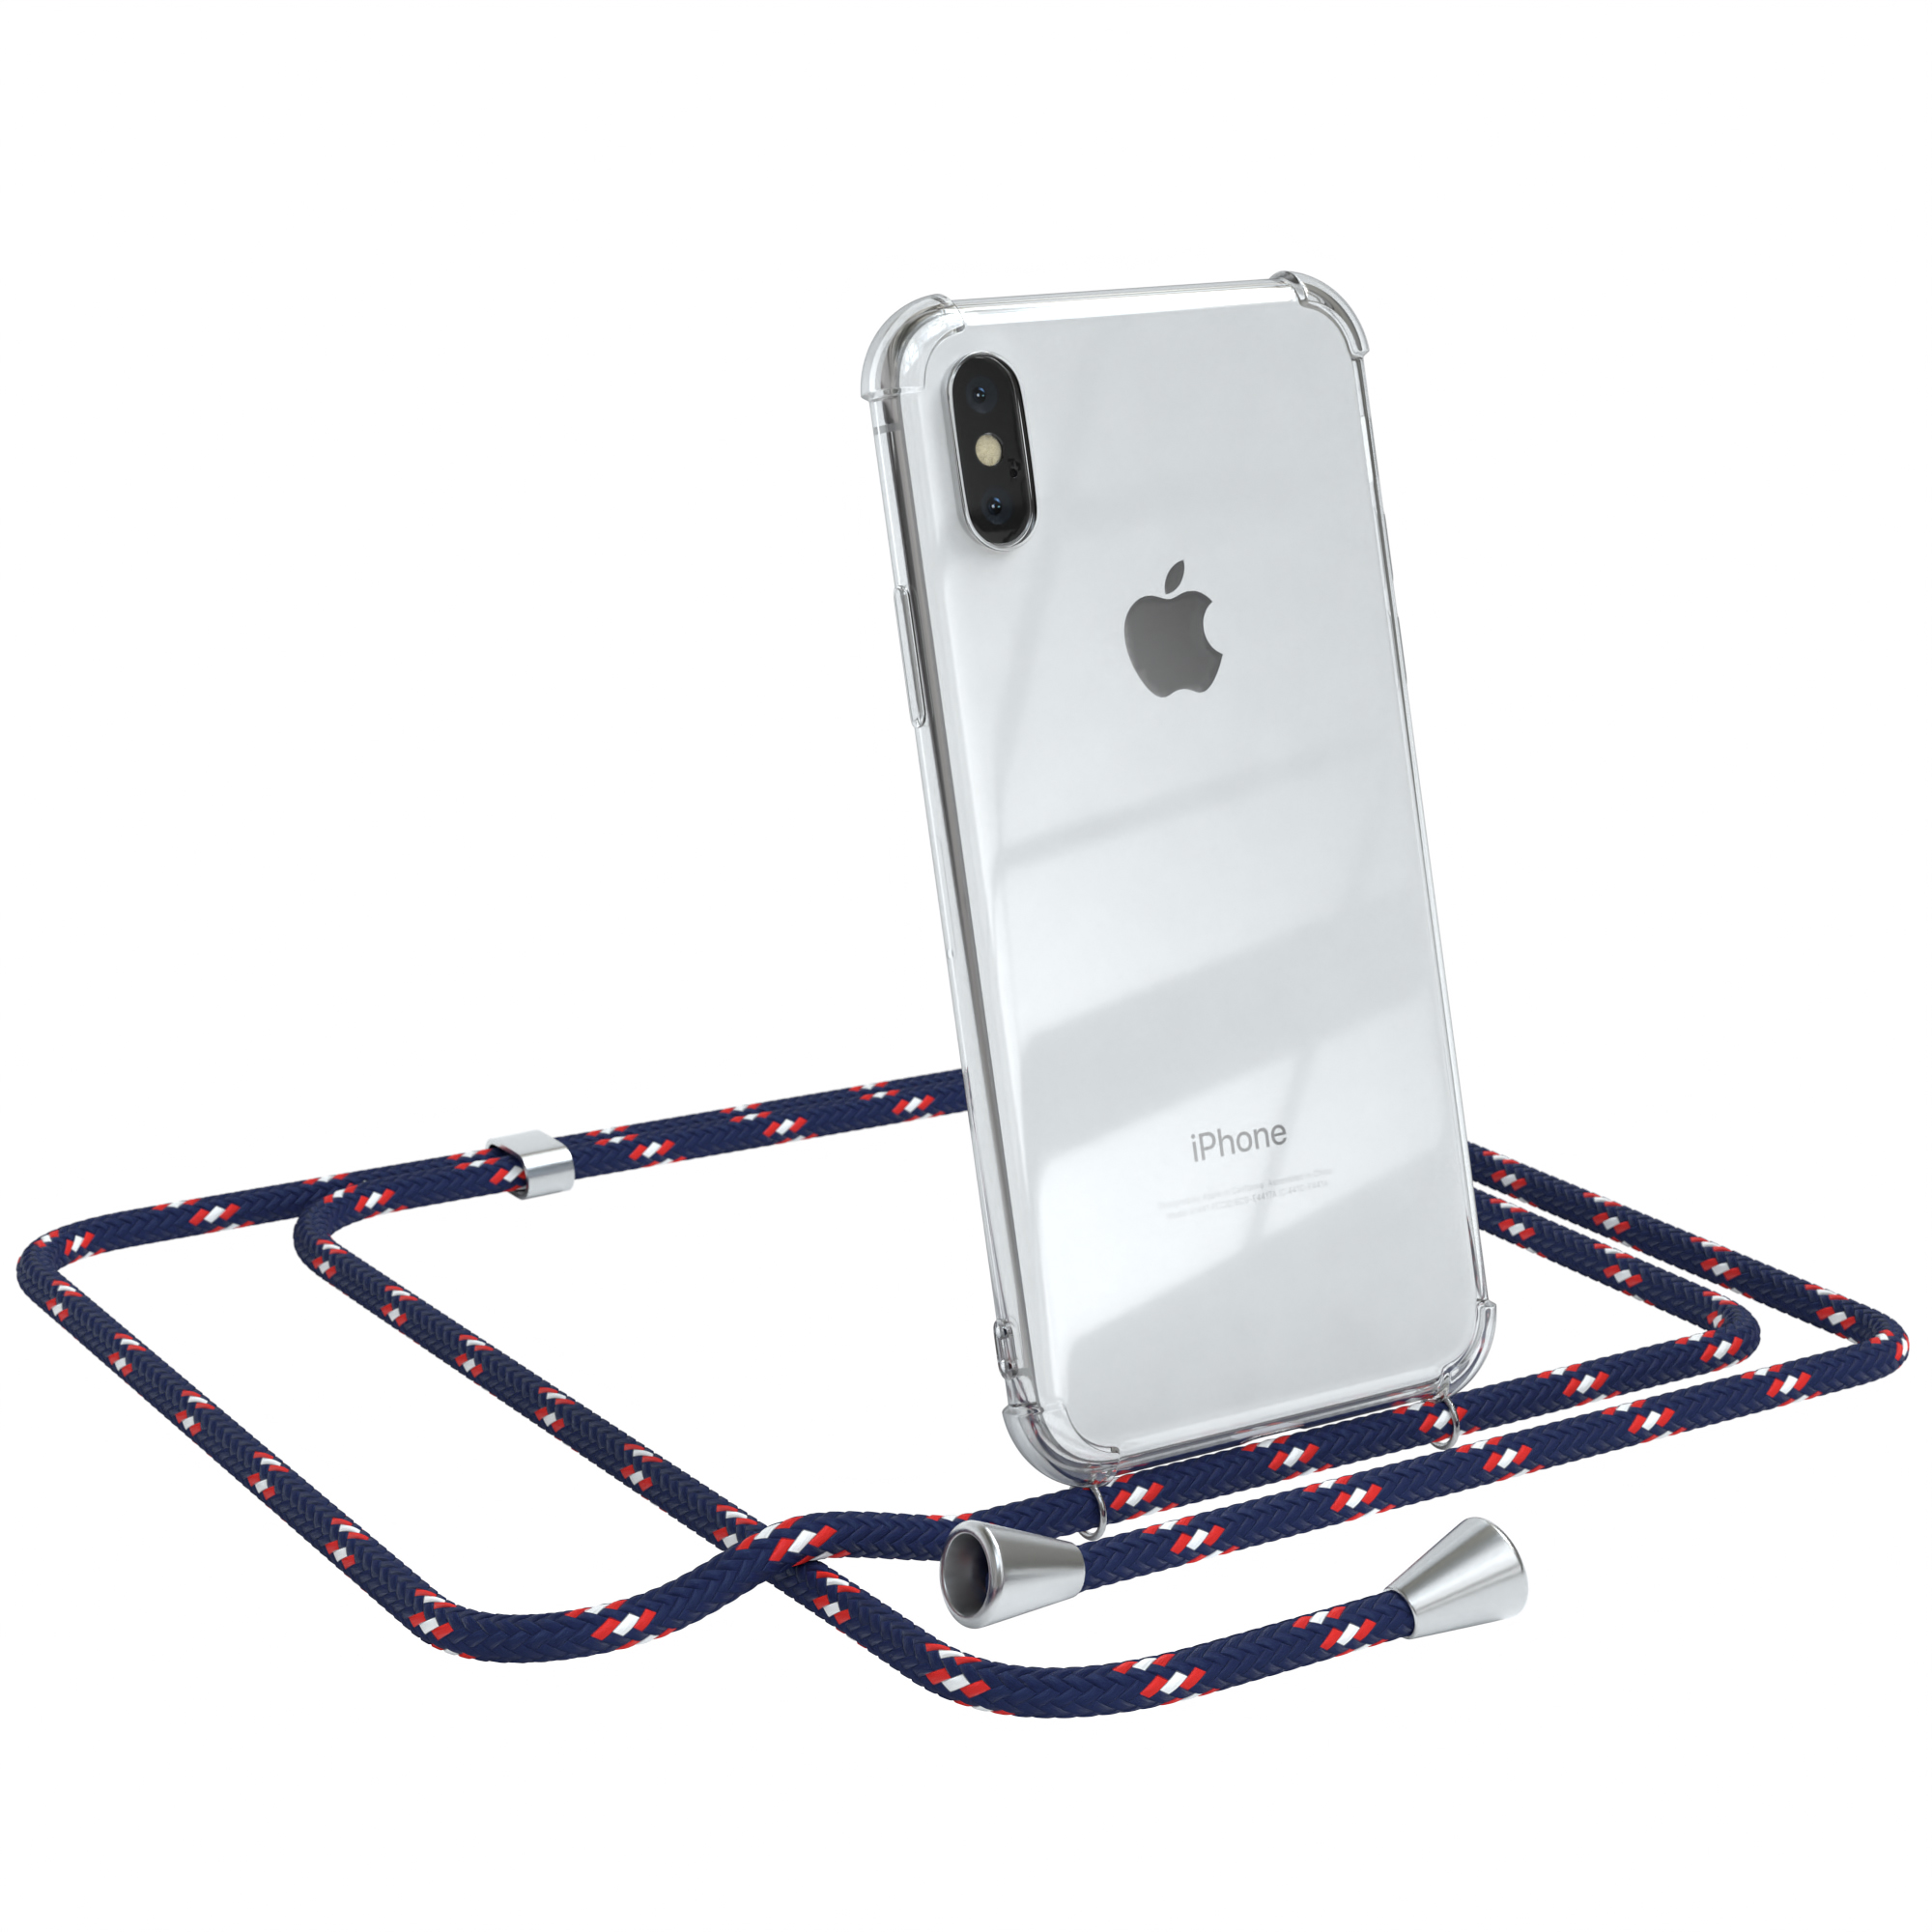 EAZY CASE Clear Cover Camouflage / XS Max, Umhängeband, Apple, Blau Clips Umhängetasche, iPhone Silber mit